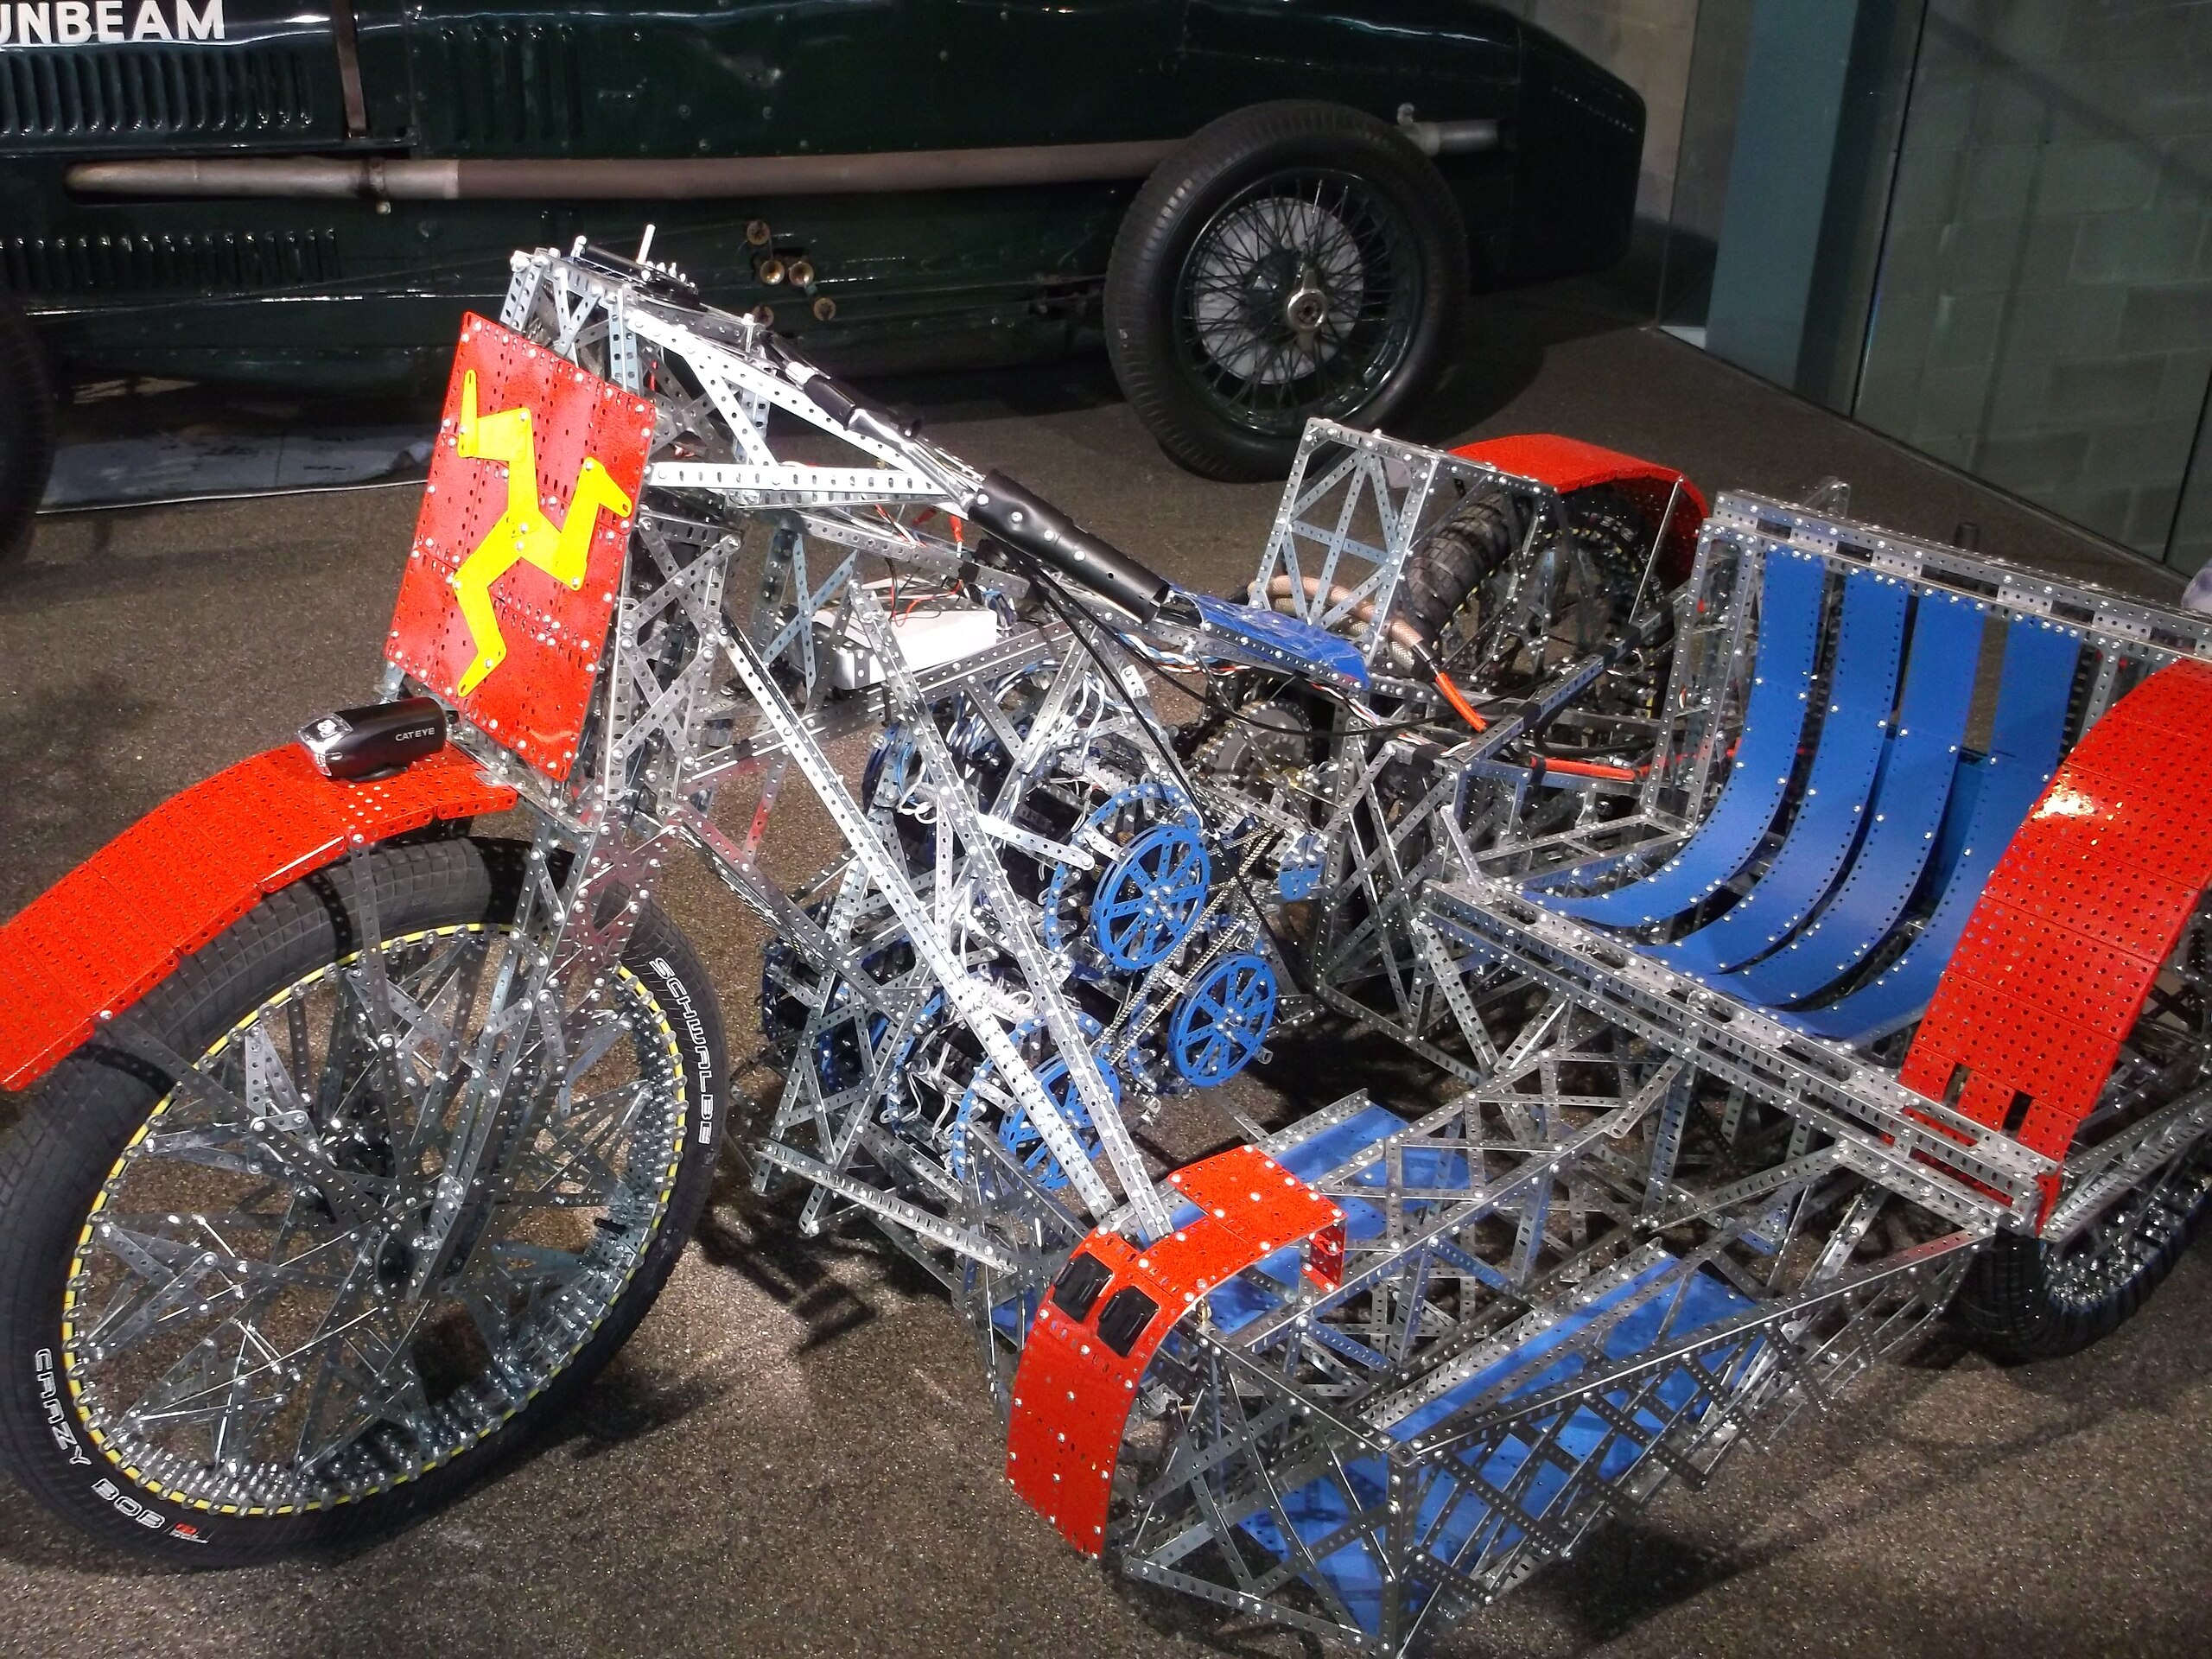 File:Meccano Motorcycle made for James May's Toy Stories.JPG - Wikipedia